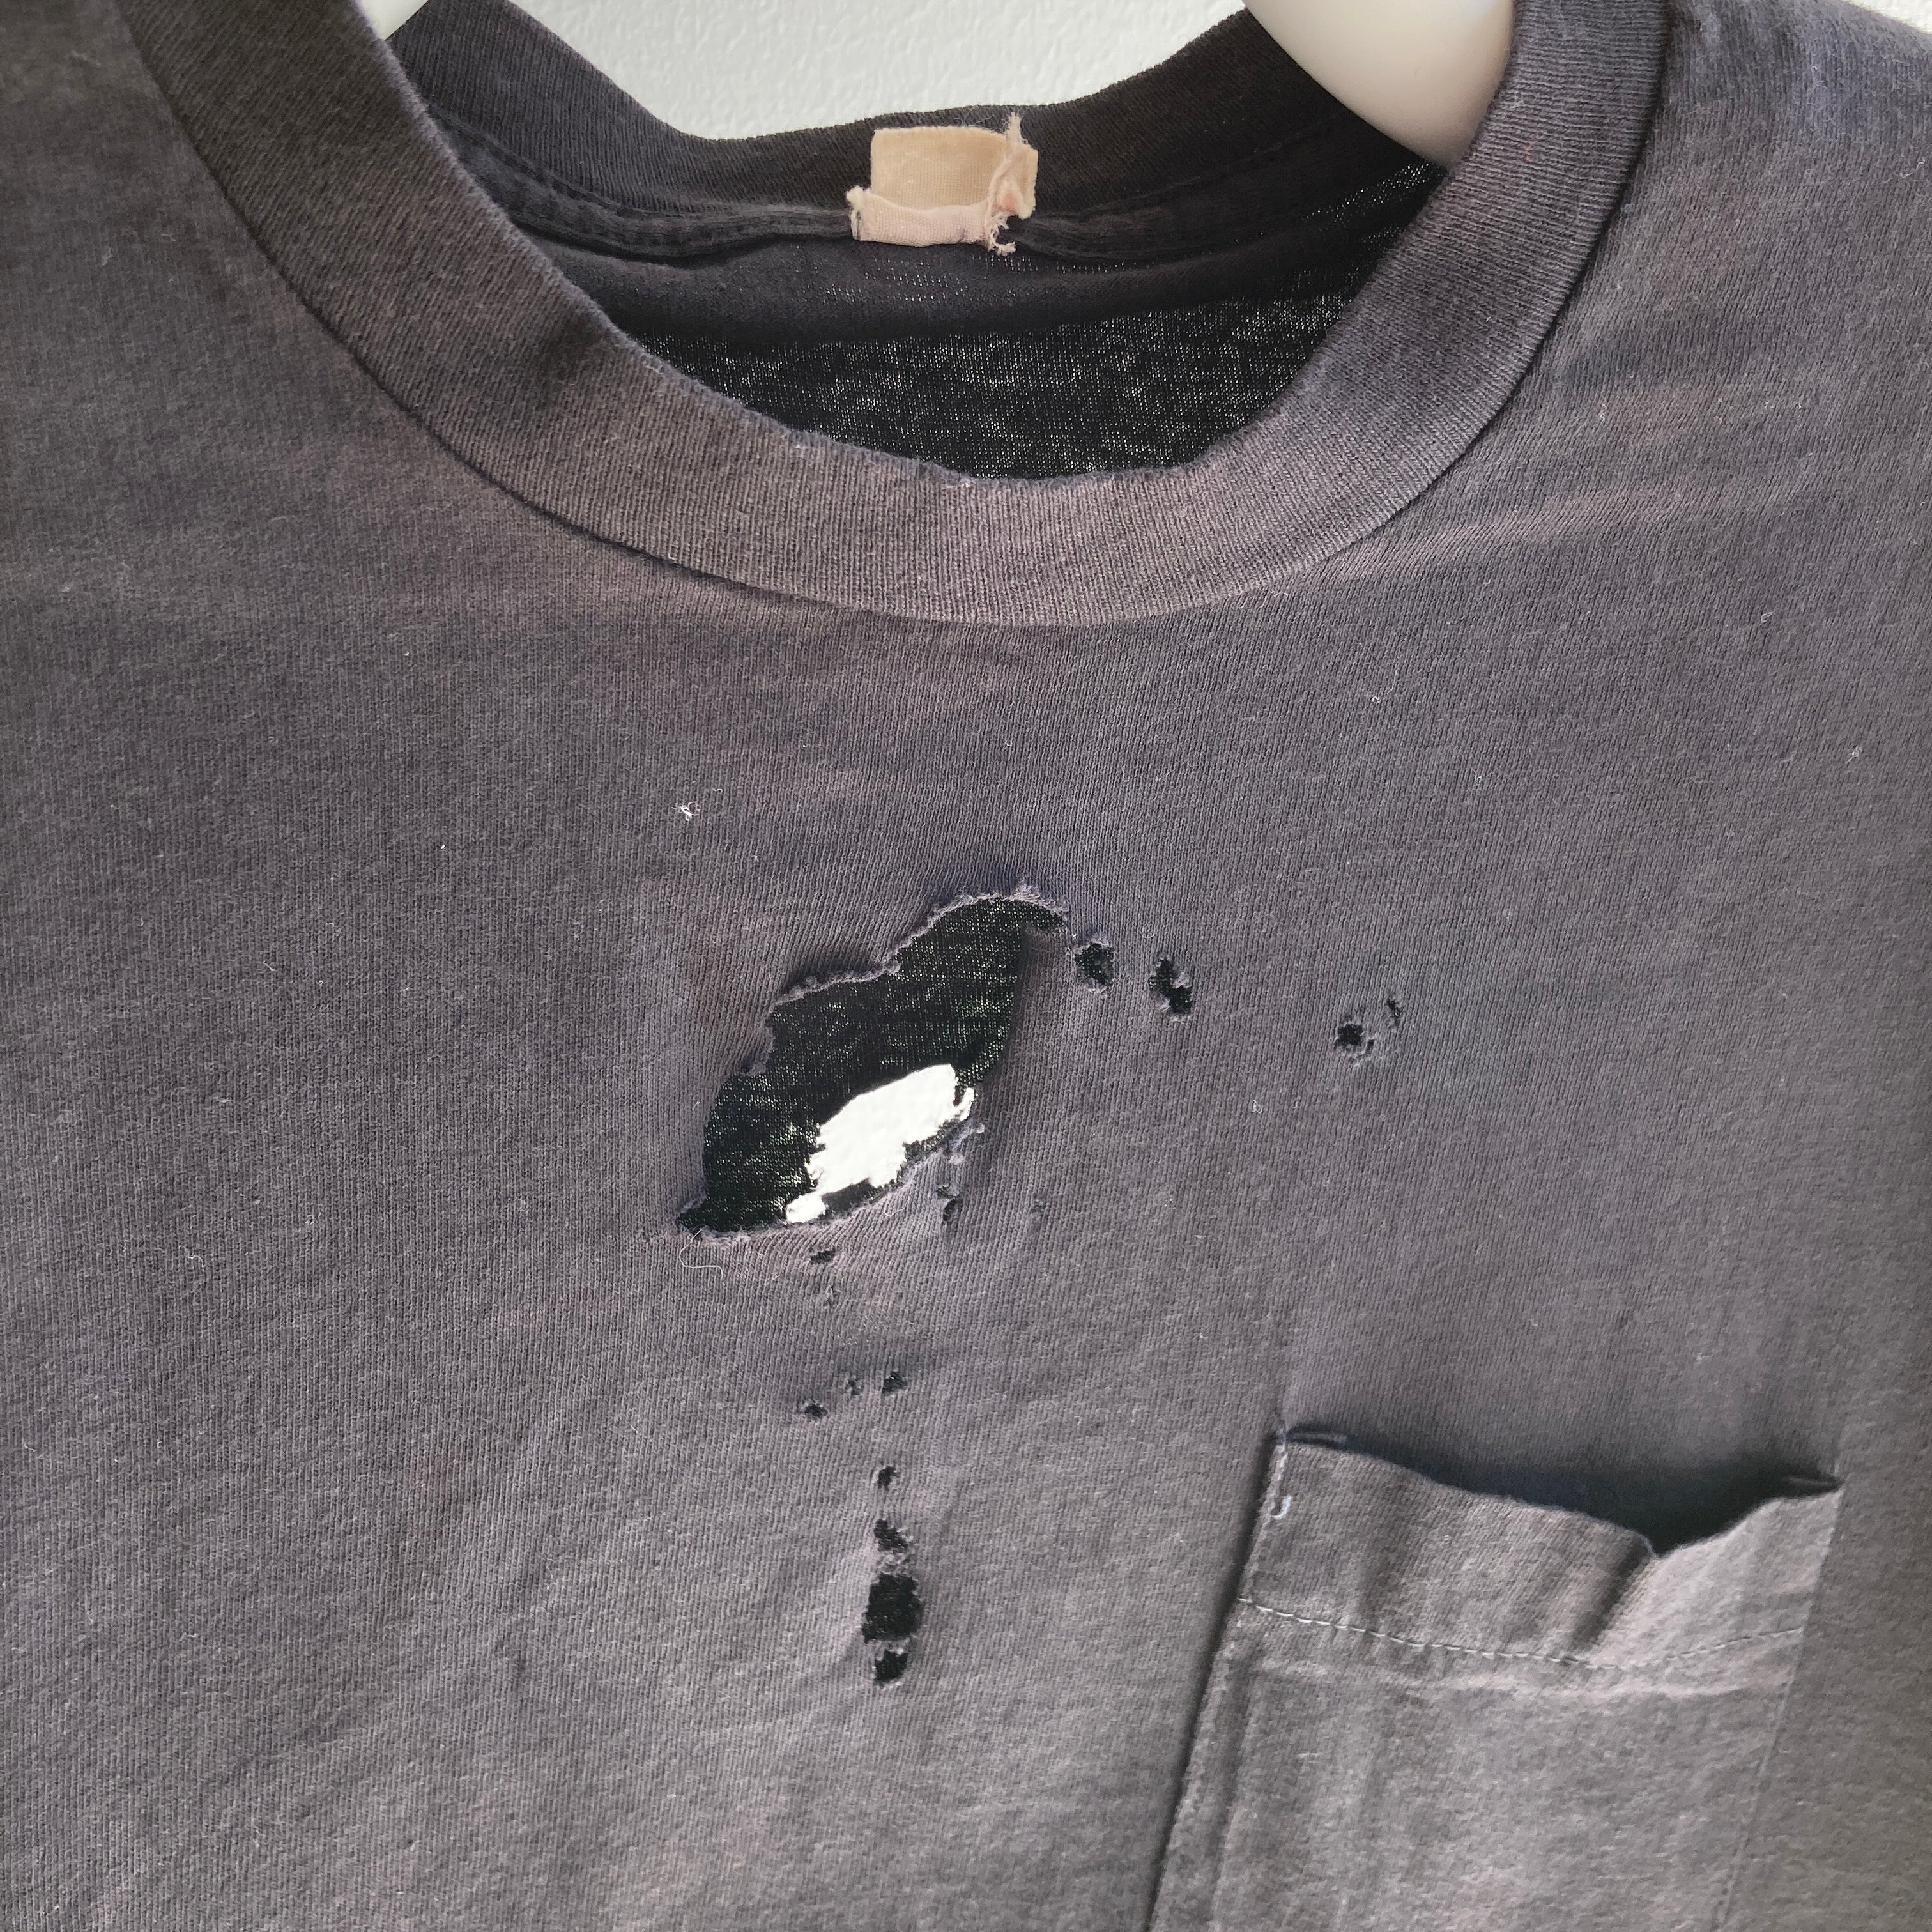 1980s FOTL Beat Up (shot through the heart, but it's not too late) Blank Black Pocket T-Shirt - Cotton